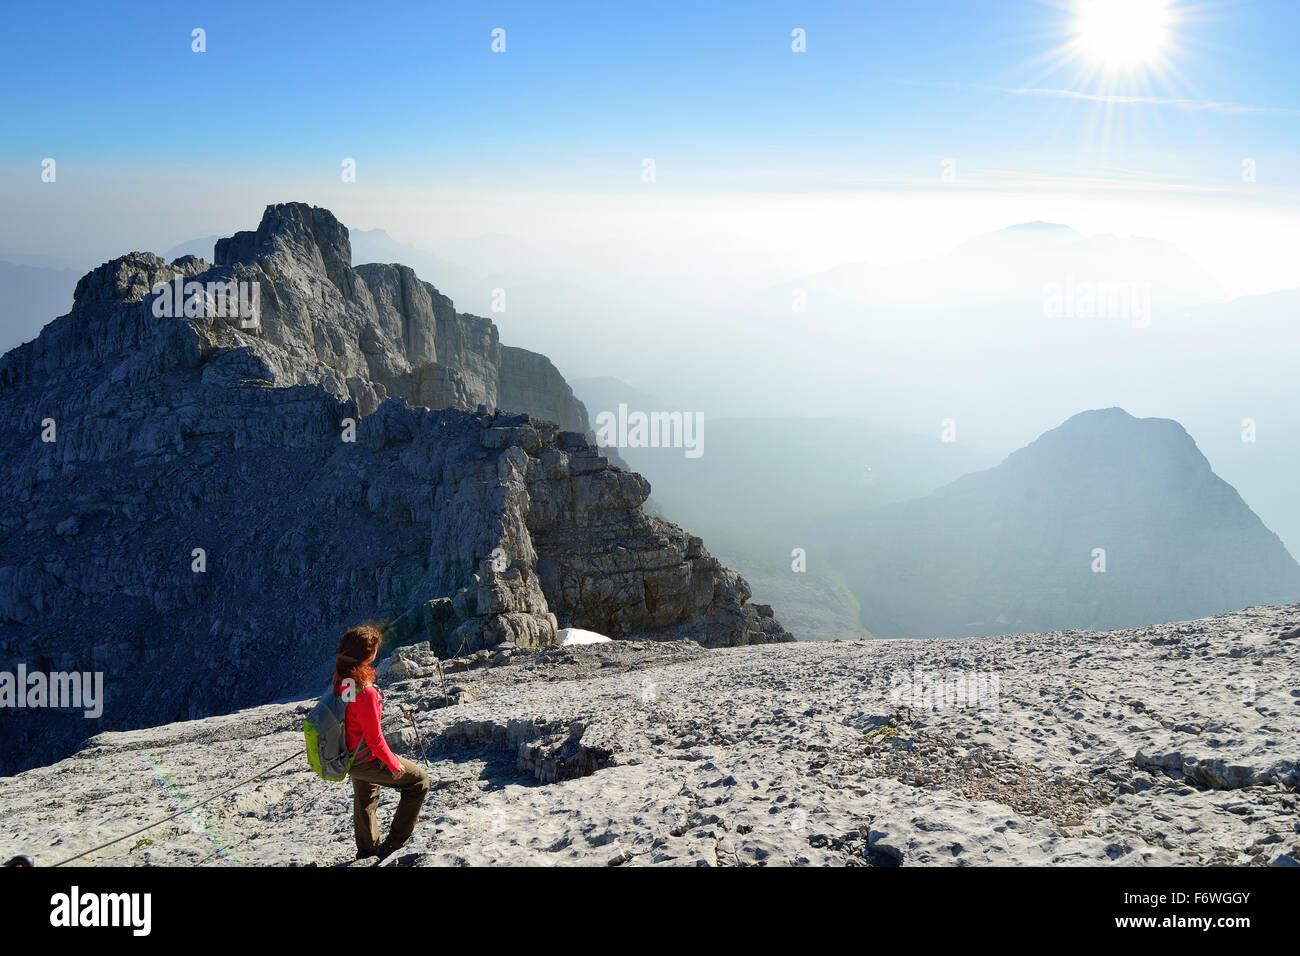 Woman standing on ledge and looking at view, Hocheck in background, Watzmann, Berchtesgaden Alps, Berchtesgaden National Park, B Stock Photo